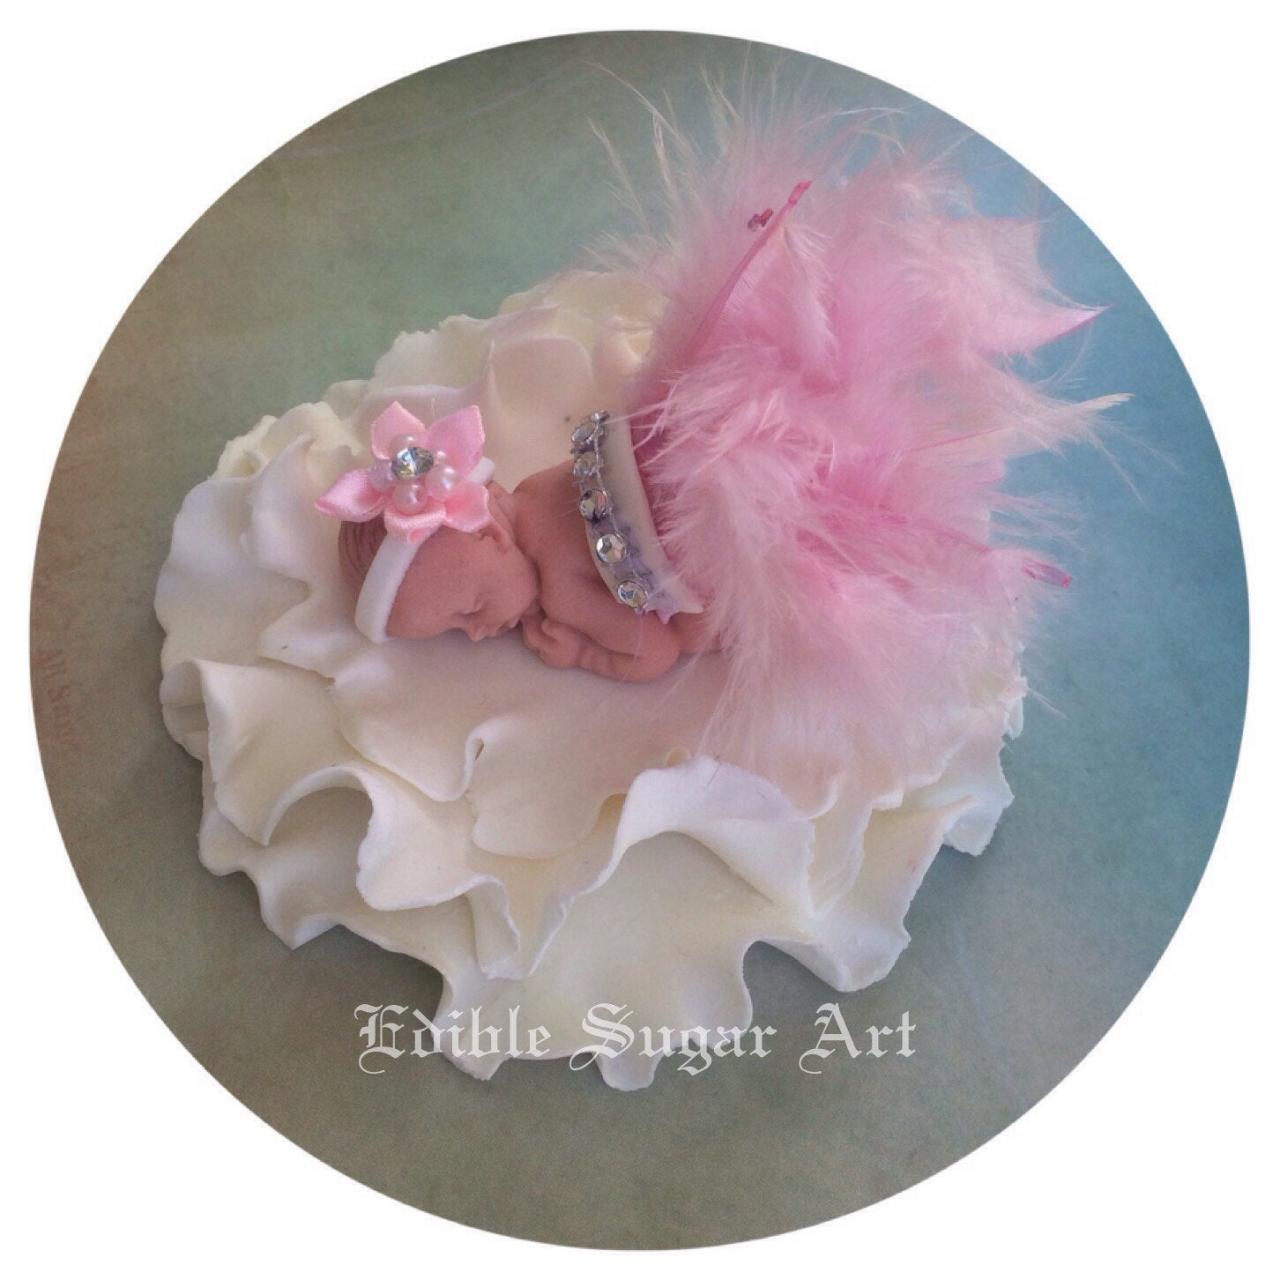 Baby Shower Cake Topper Pink Feather Tutu Topper Fondant Baby Tutu Cake Topper Fondant Cake Topper Baby Girl